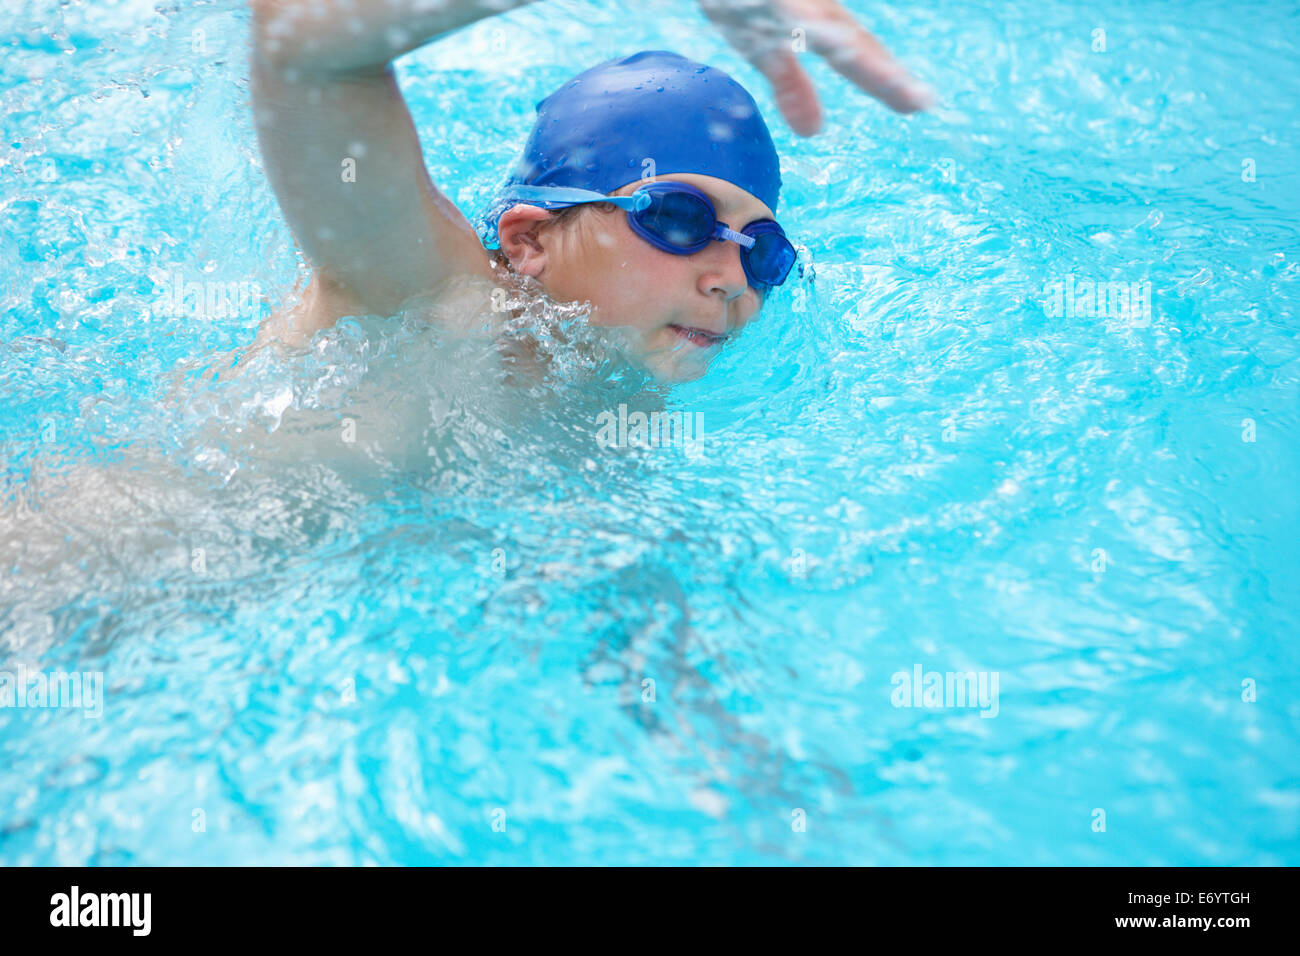 Boy swimming in outdoor pool Stock Photo